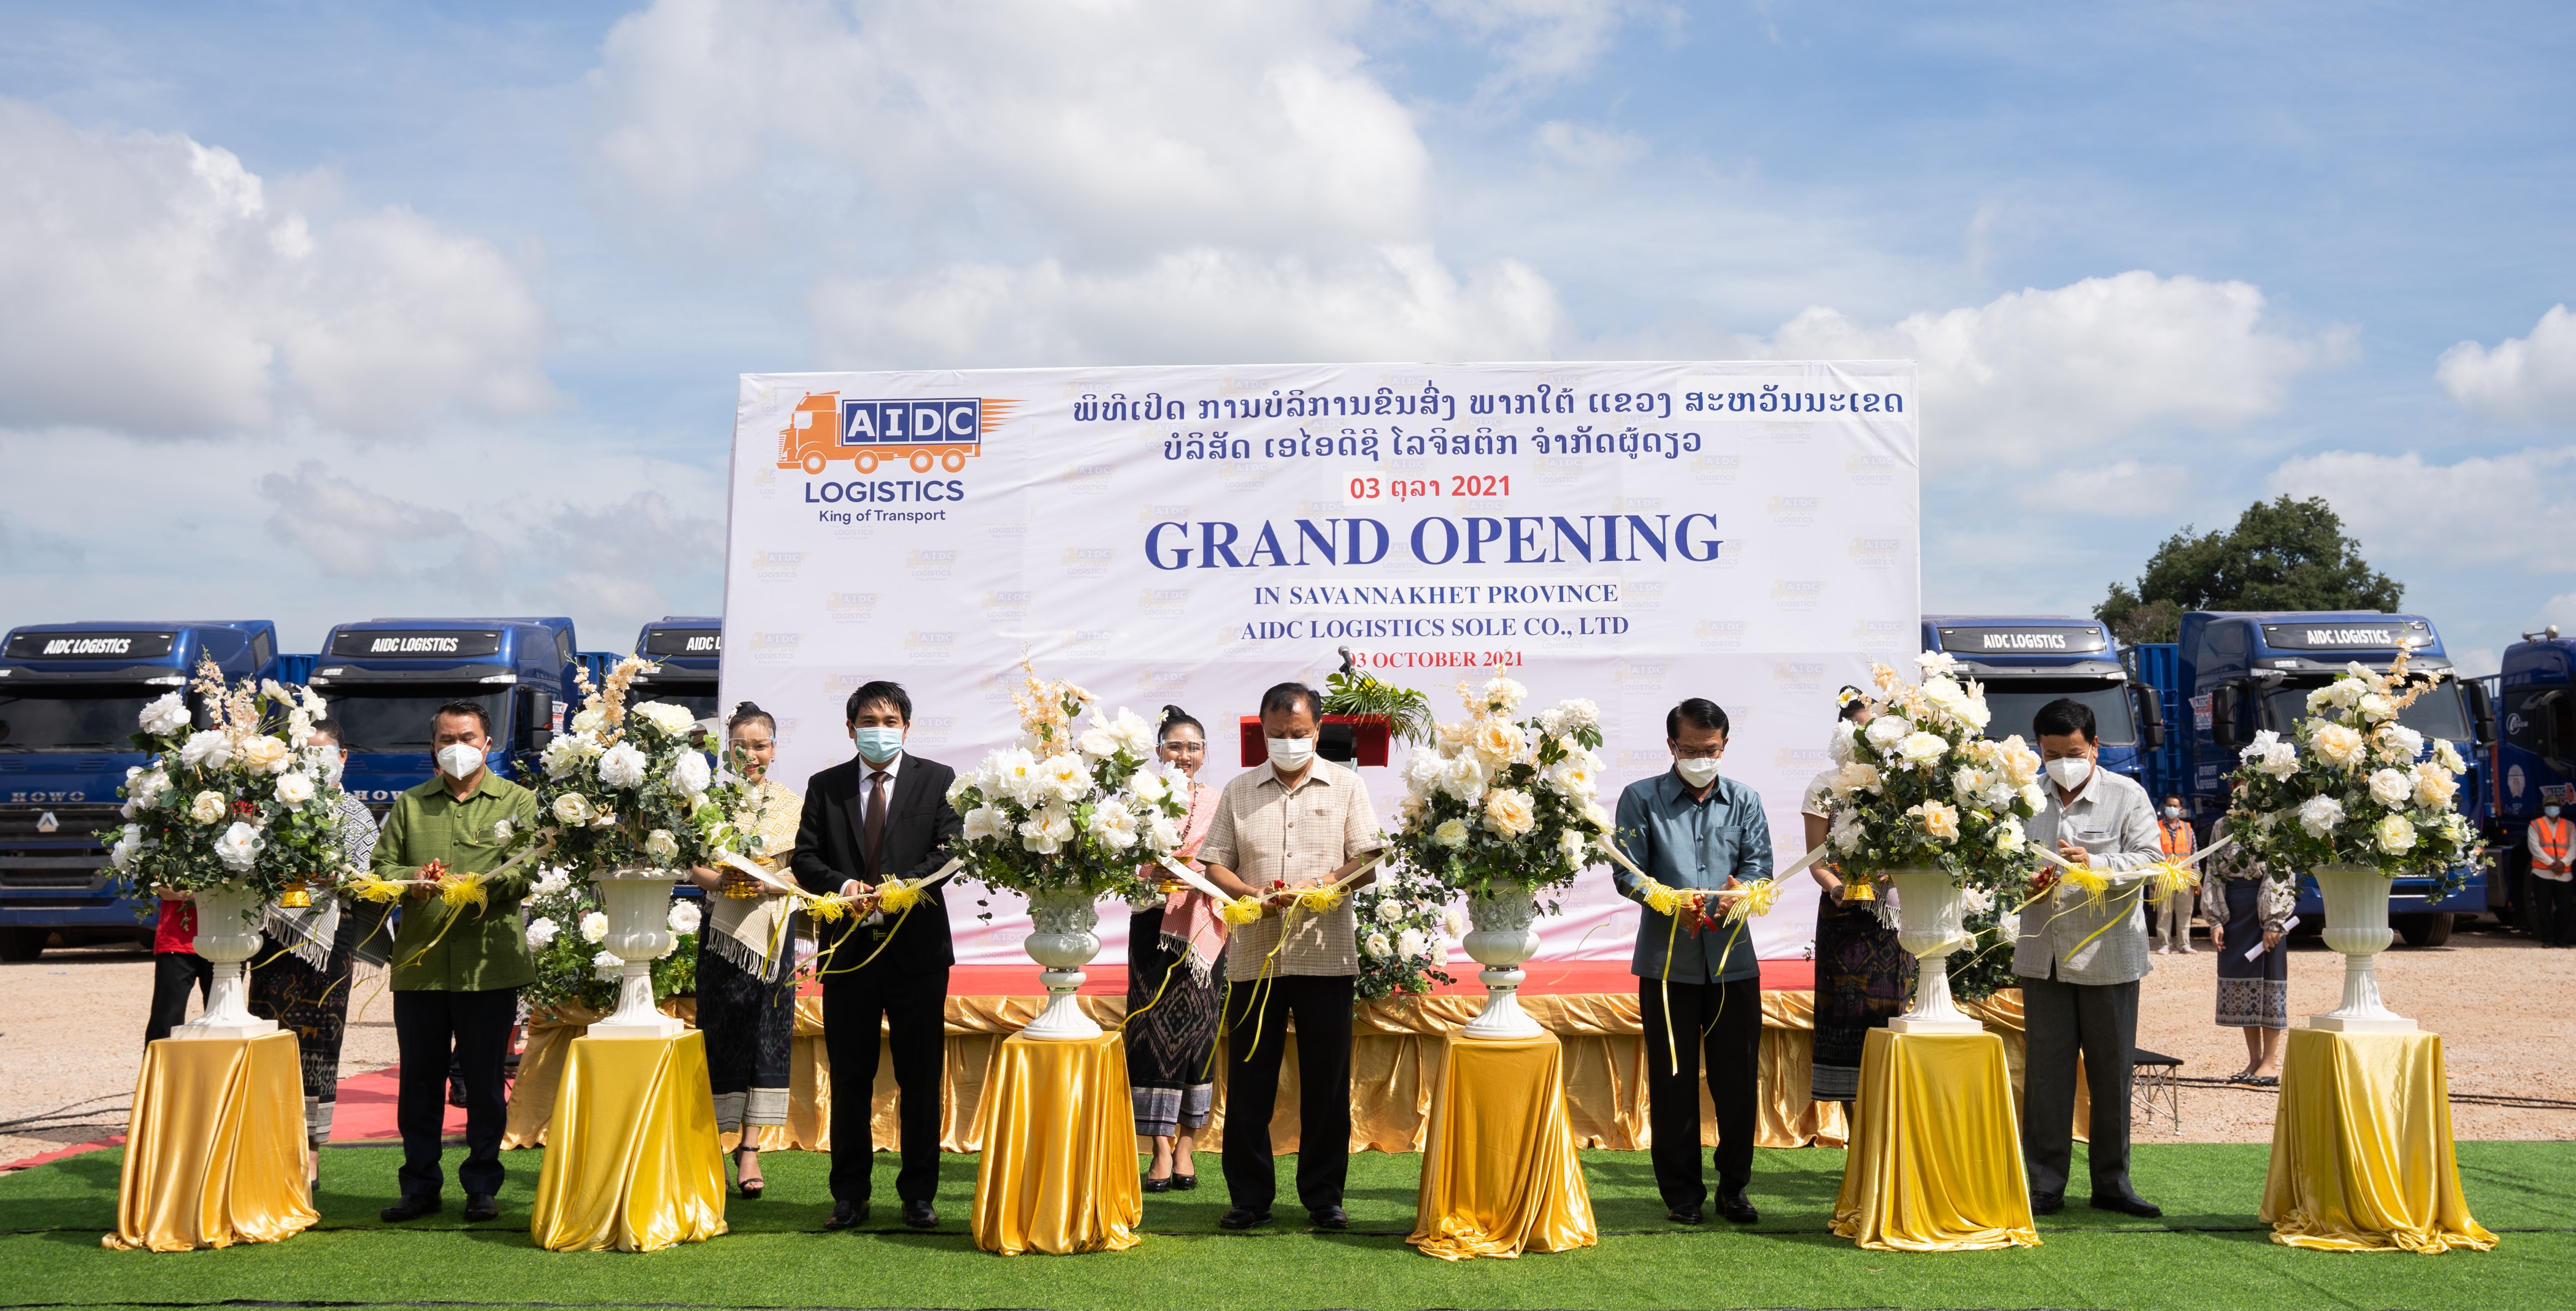 aidc logistic grand opening in savannakhet province  03 oct 2021 